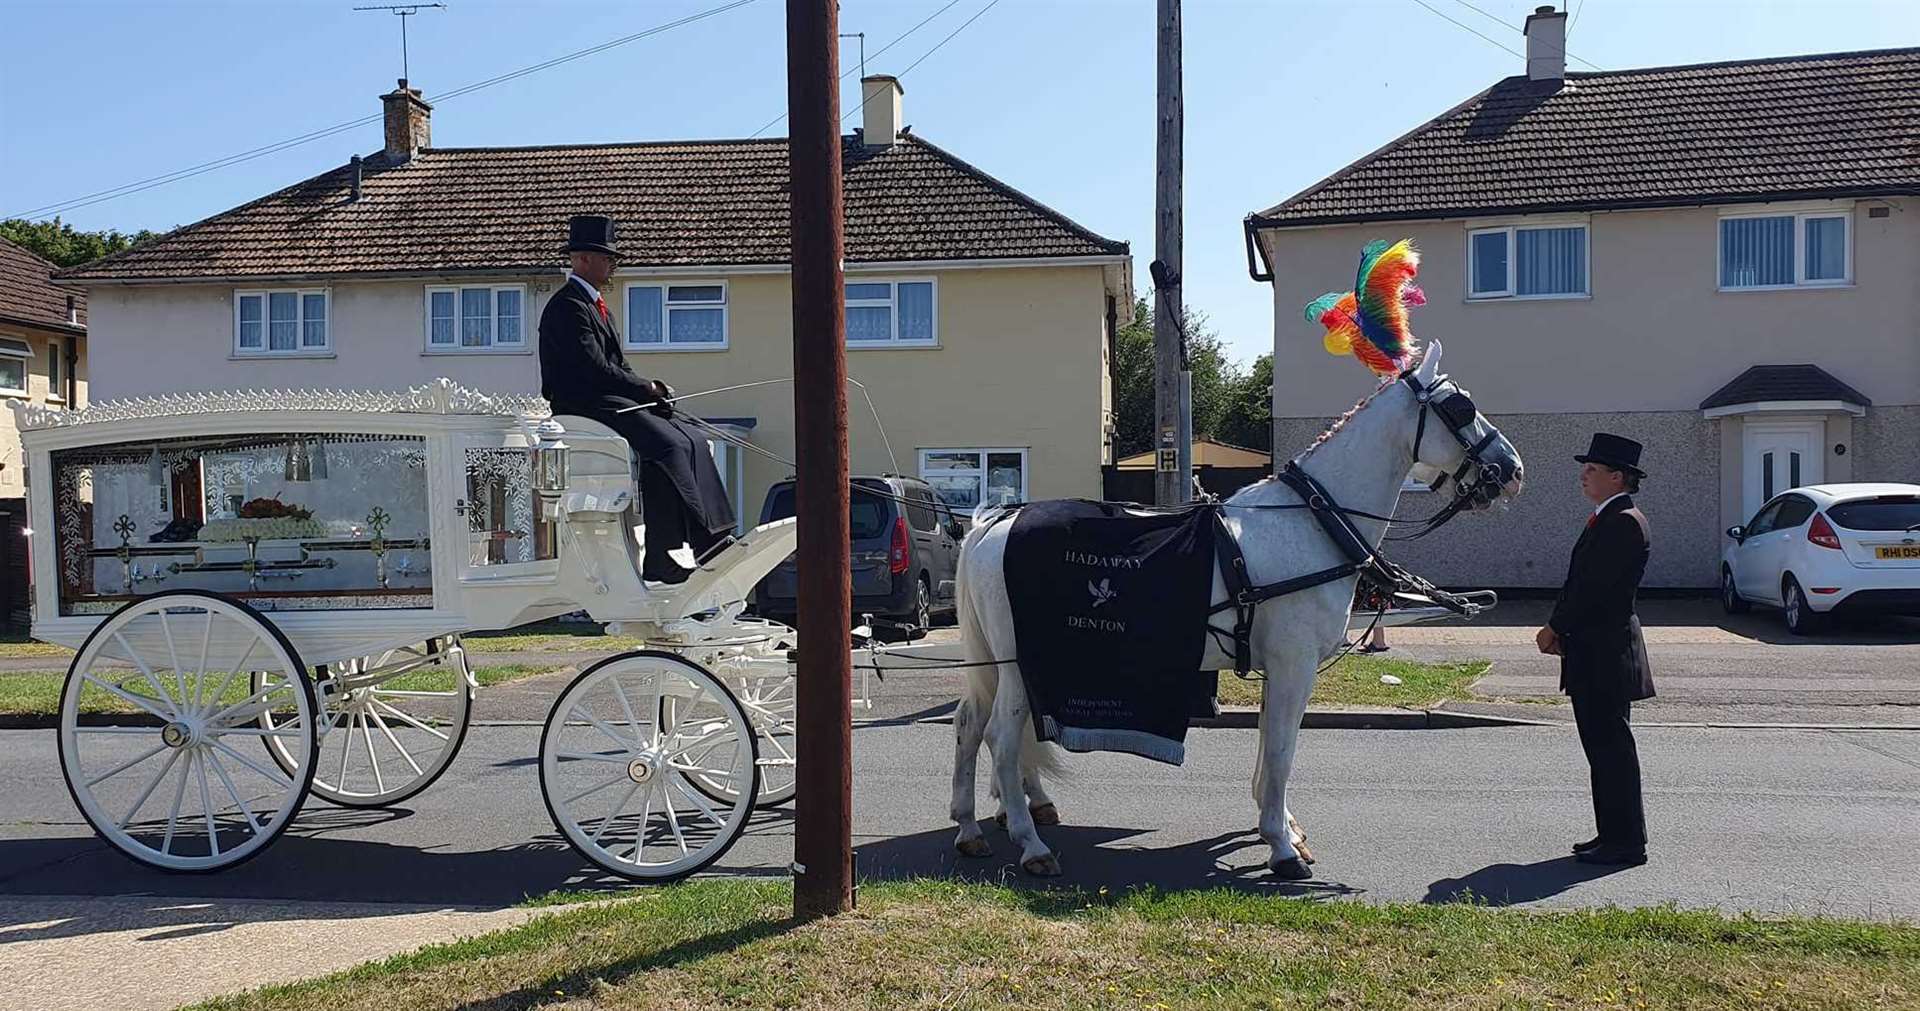 Mark Goodwin was taken on his final journey through Ashford in vibrant a horse-drawn carriage